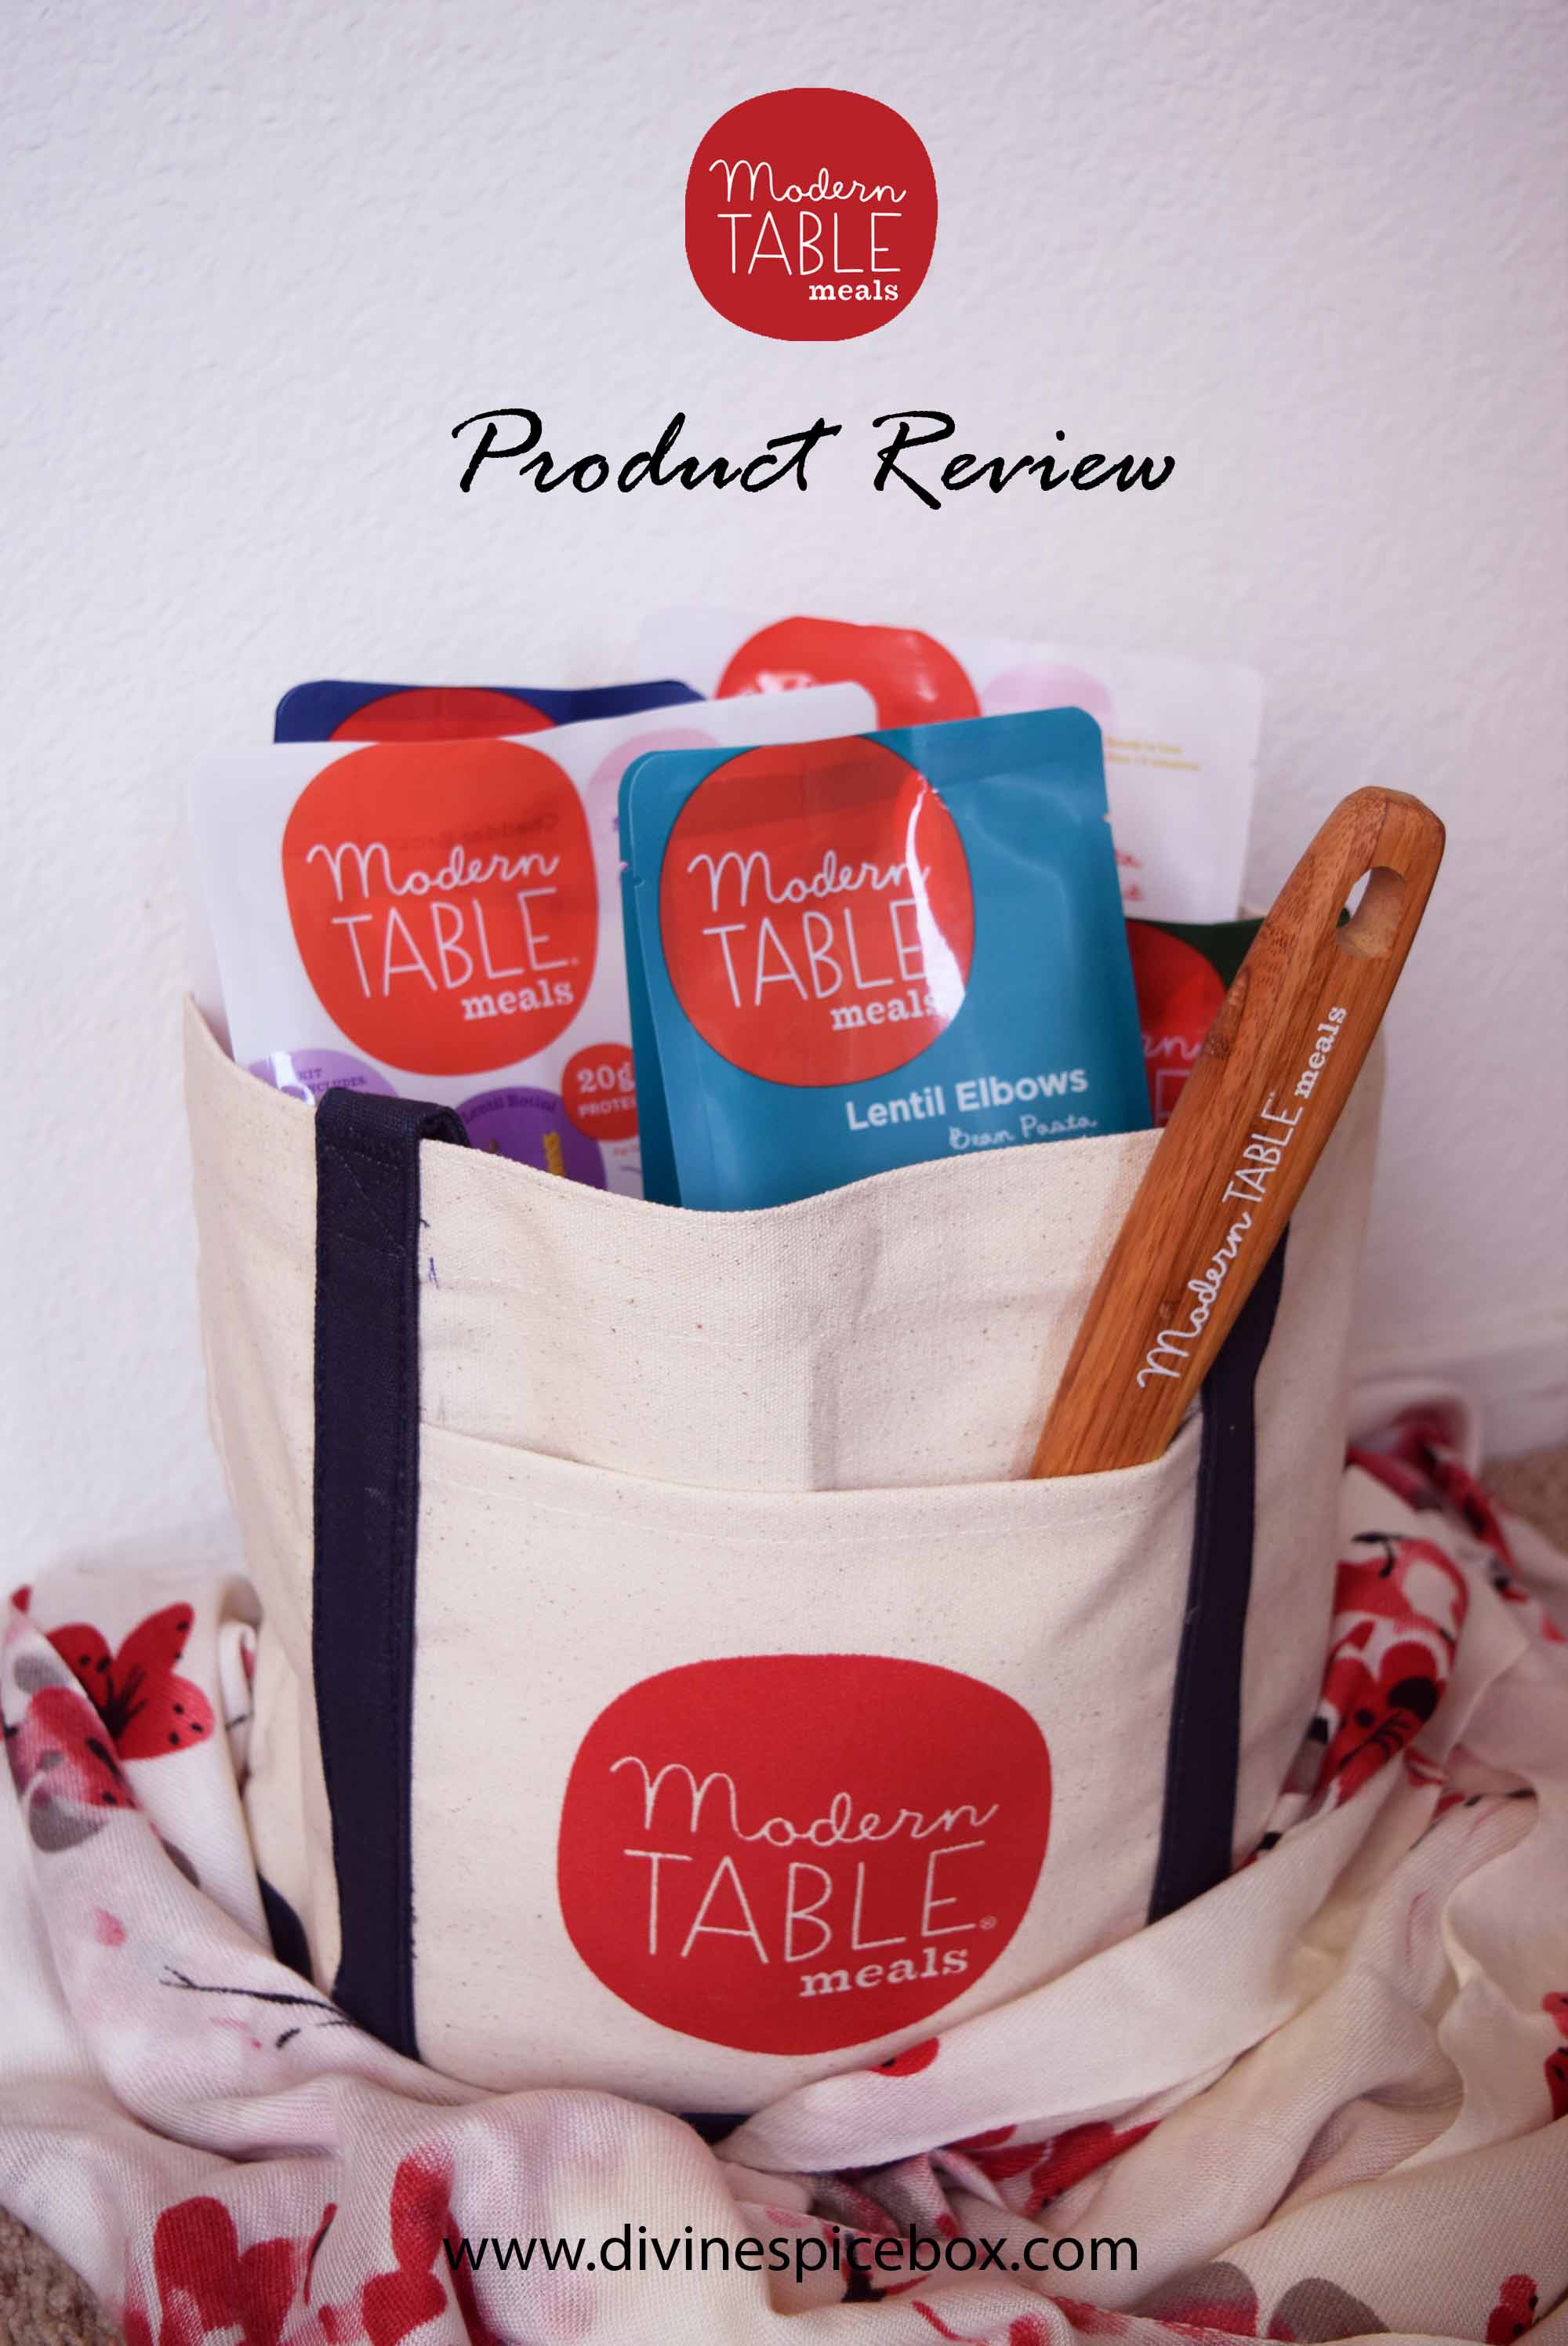 Modern Table product review